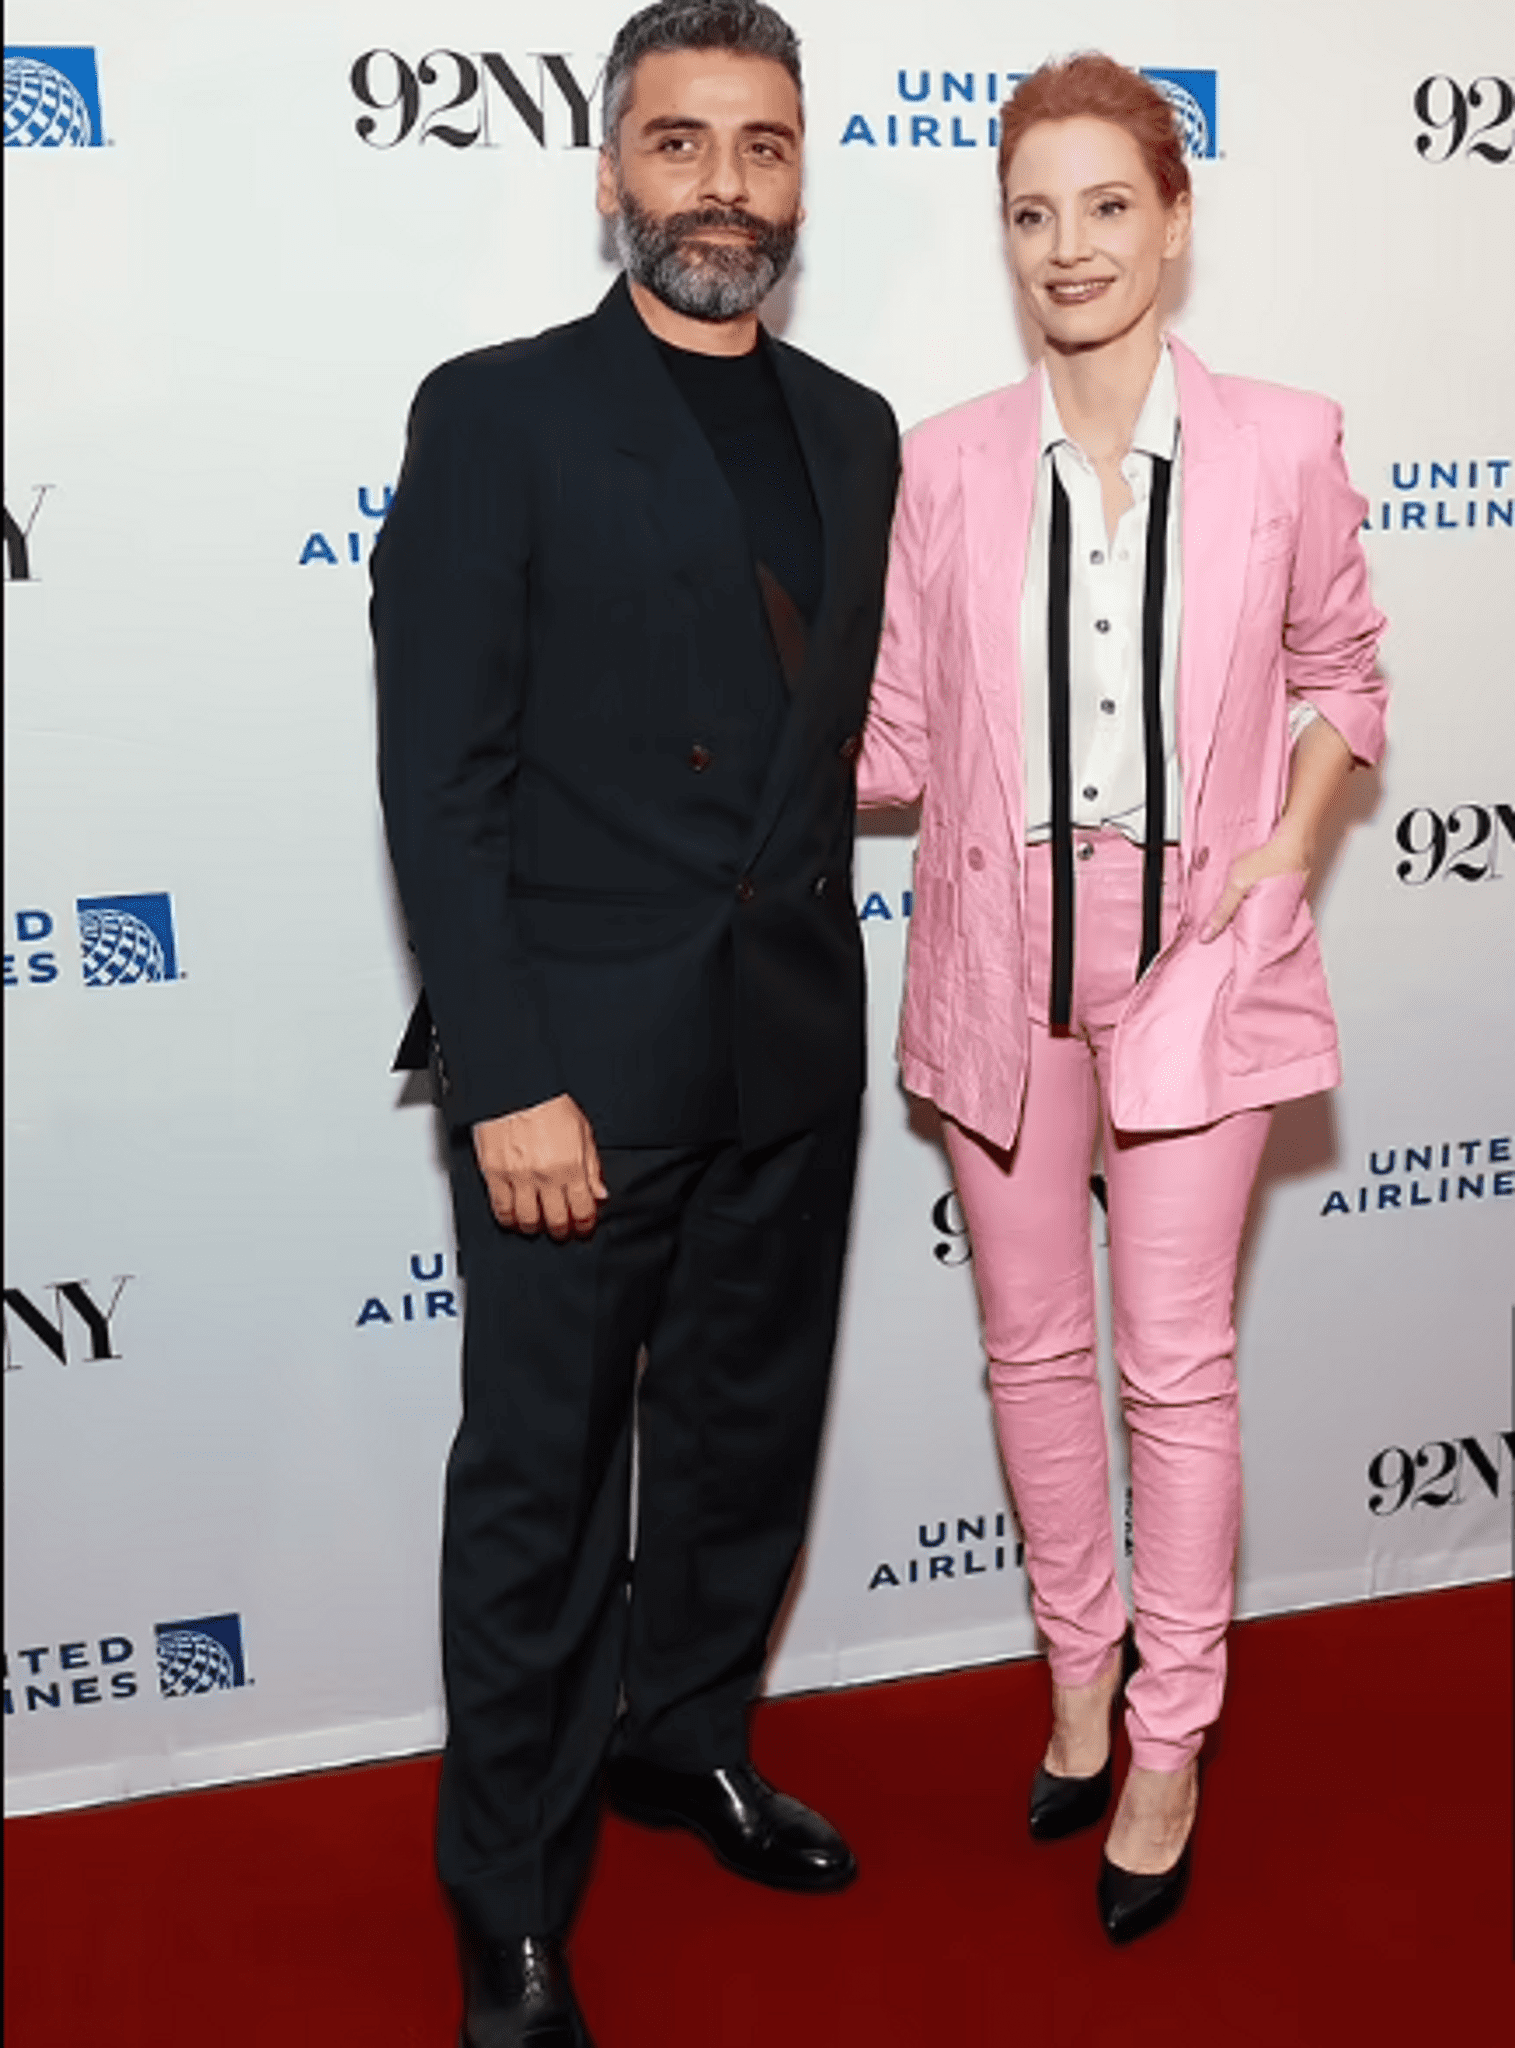 ”check-out-jessica-chastain-in-a-pink-suit-that-matches-her-hair-color-amazingly”